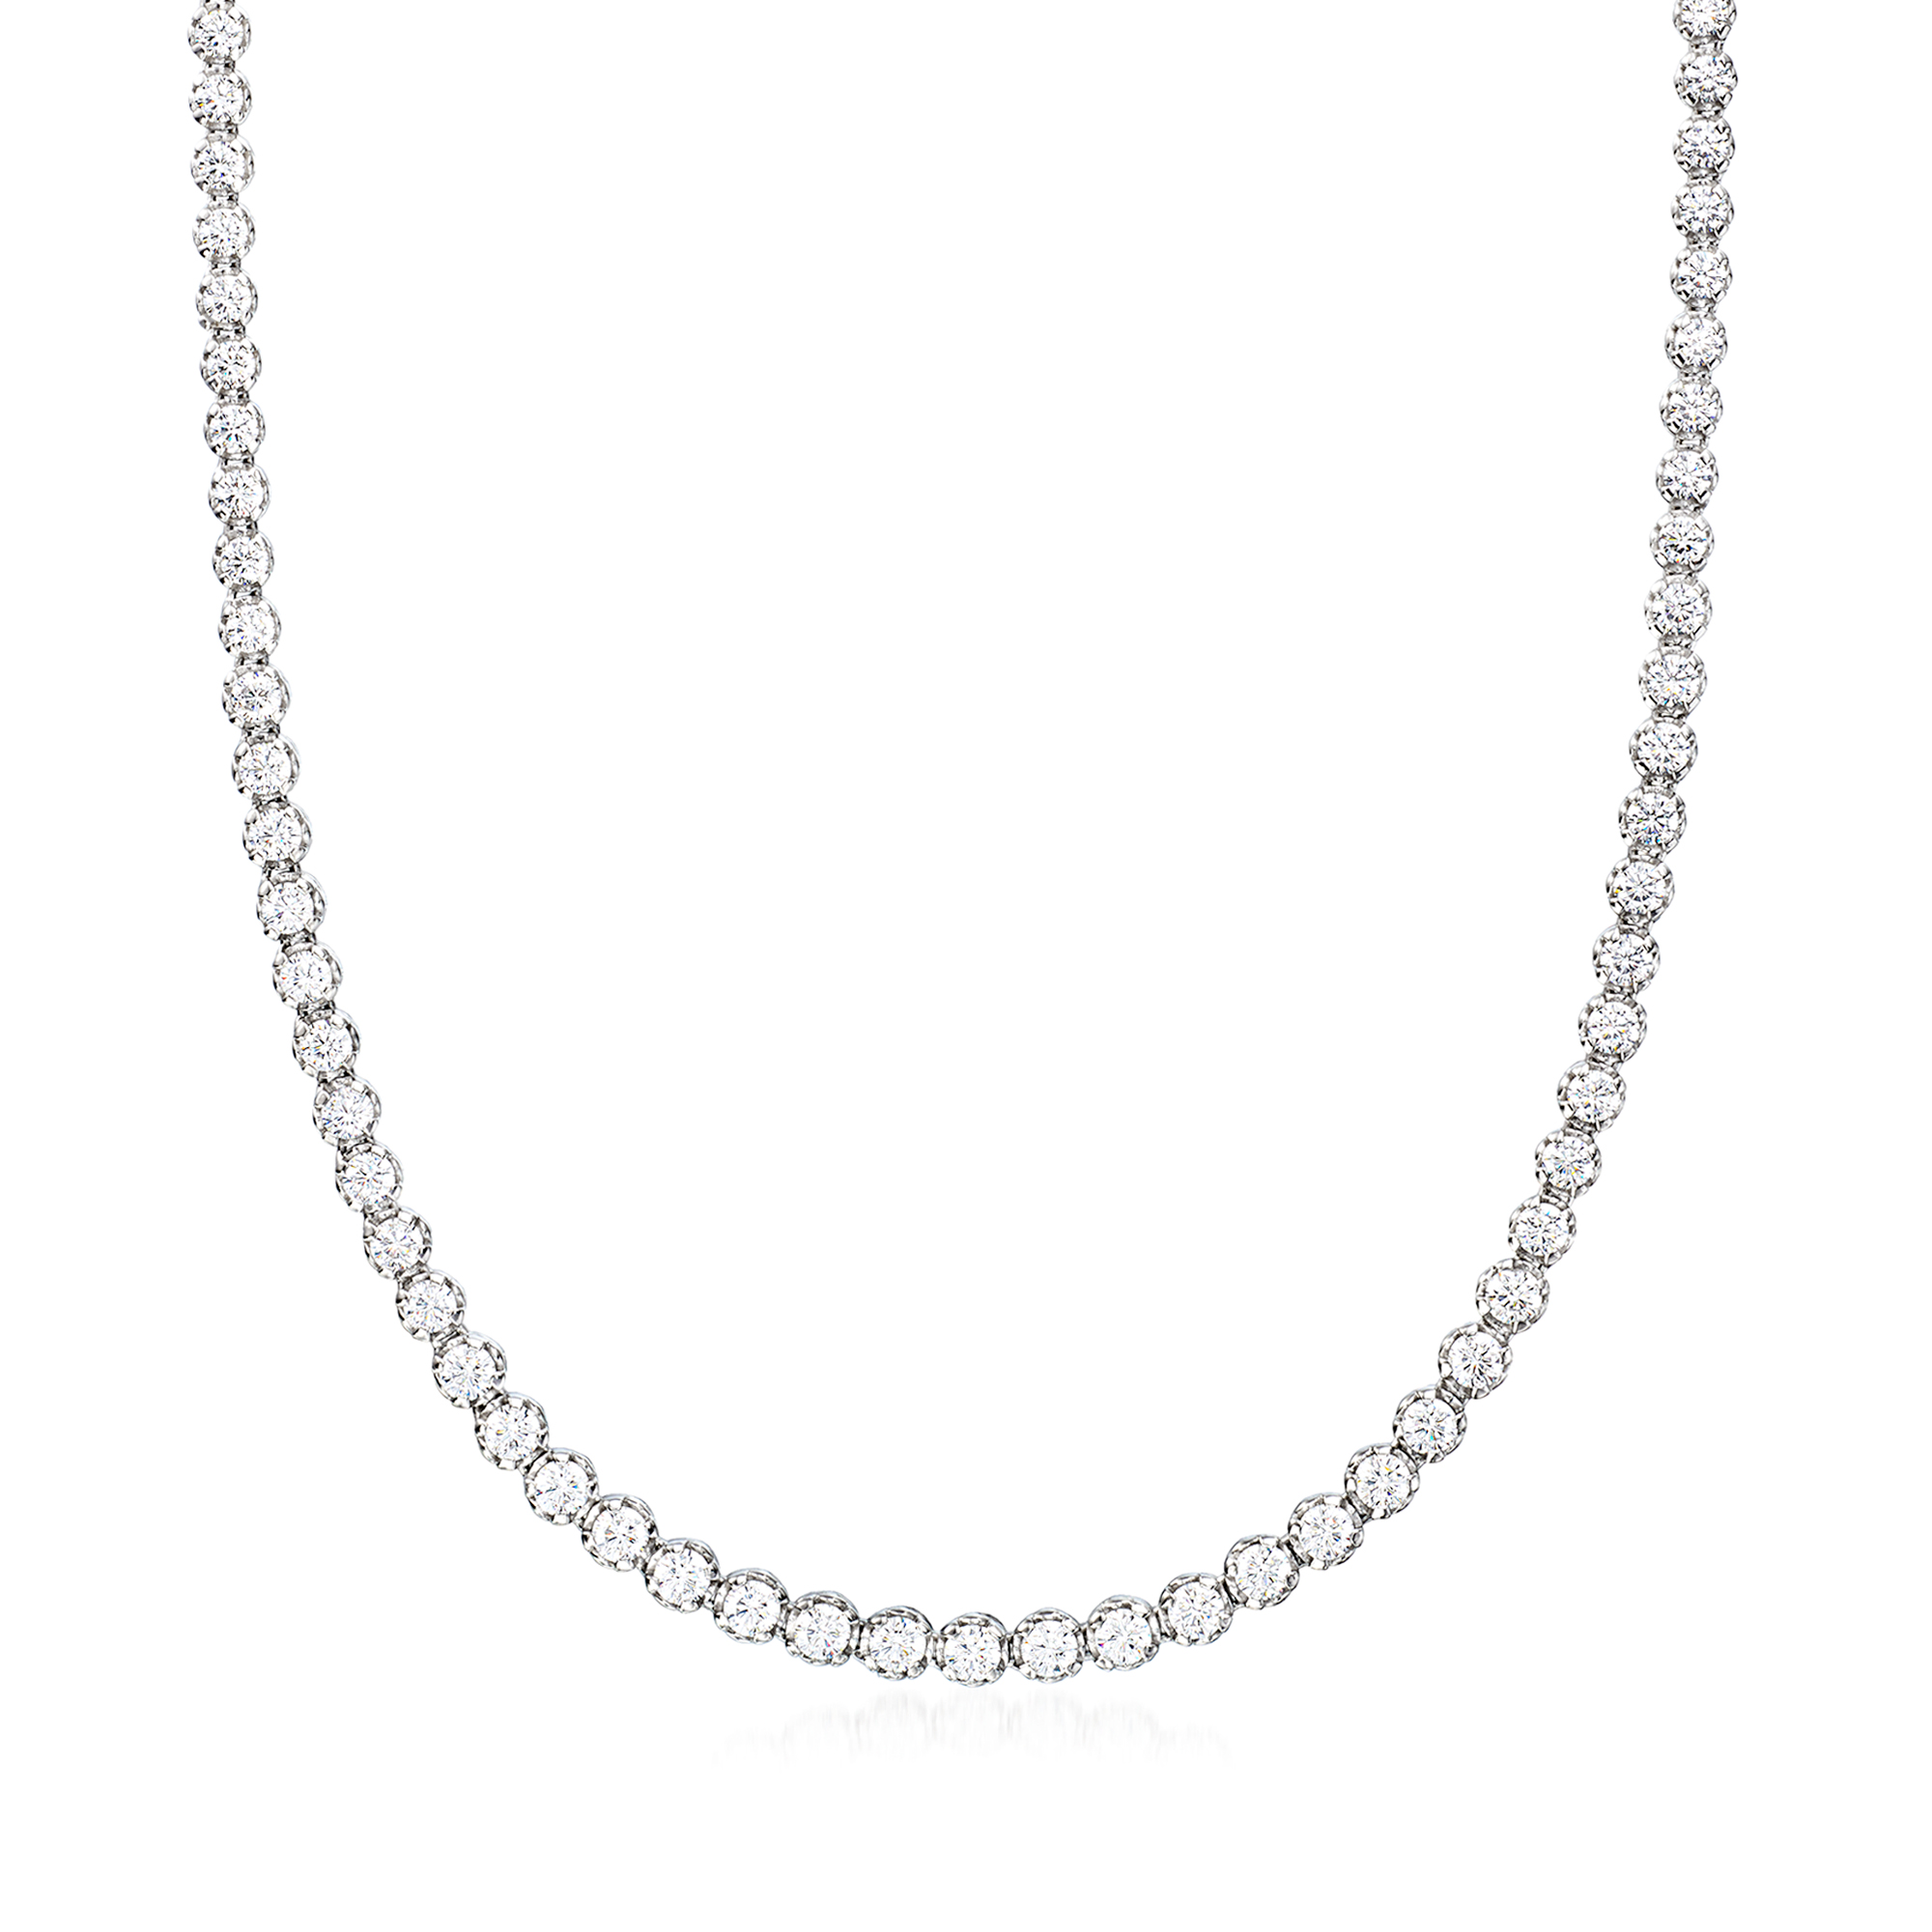 Unisex Sterling Silver 4mm Cubic Zirconia Tennis Necklace Available in 16-36